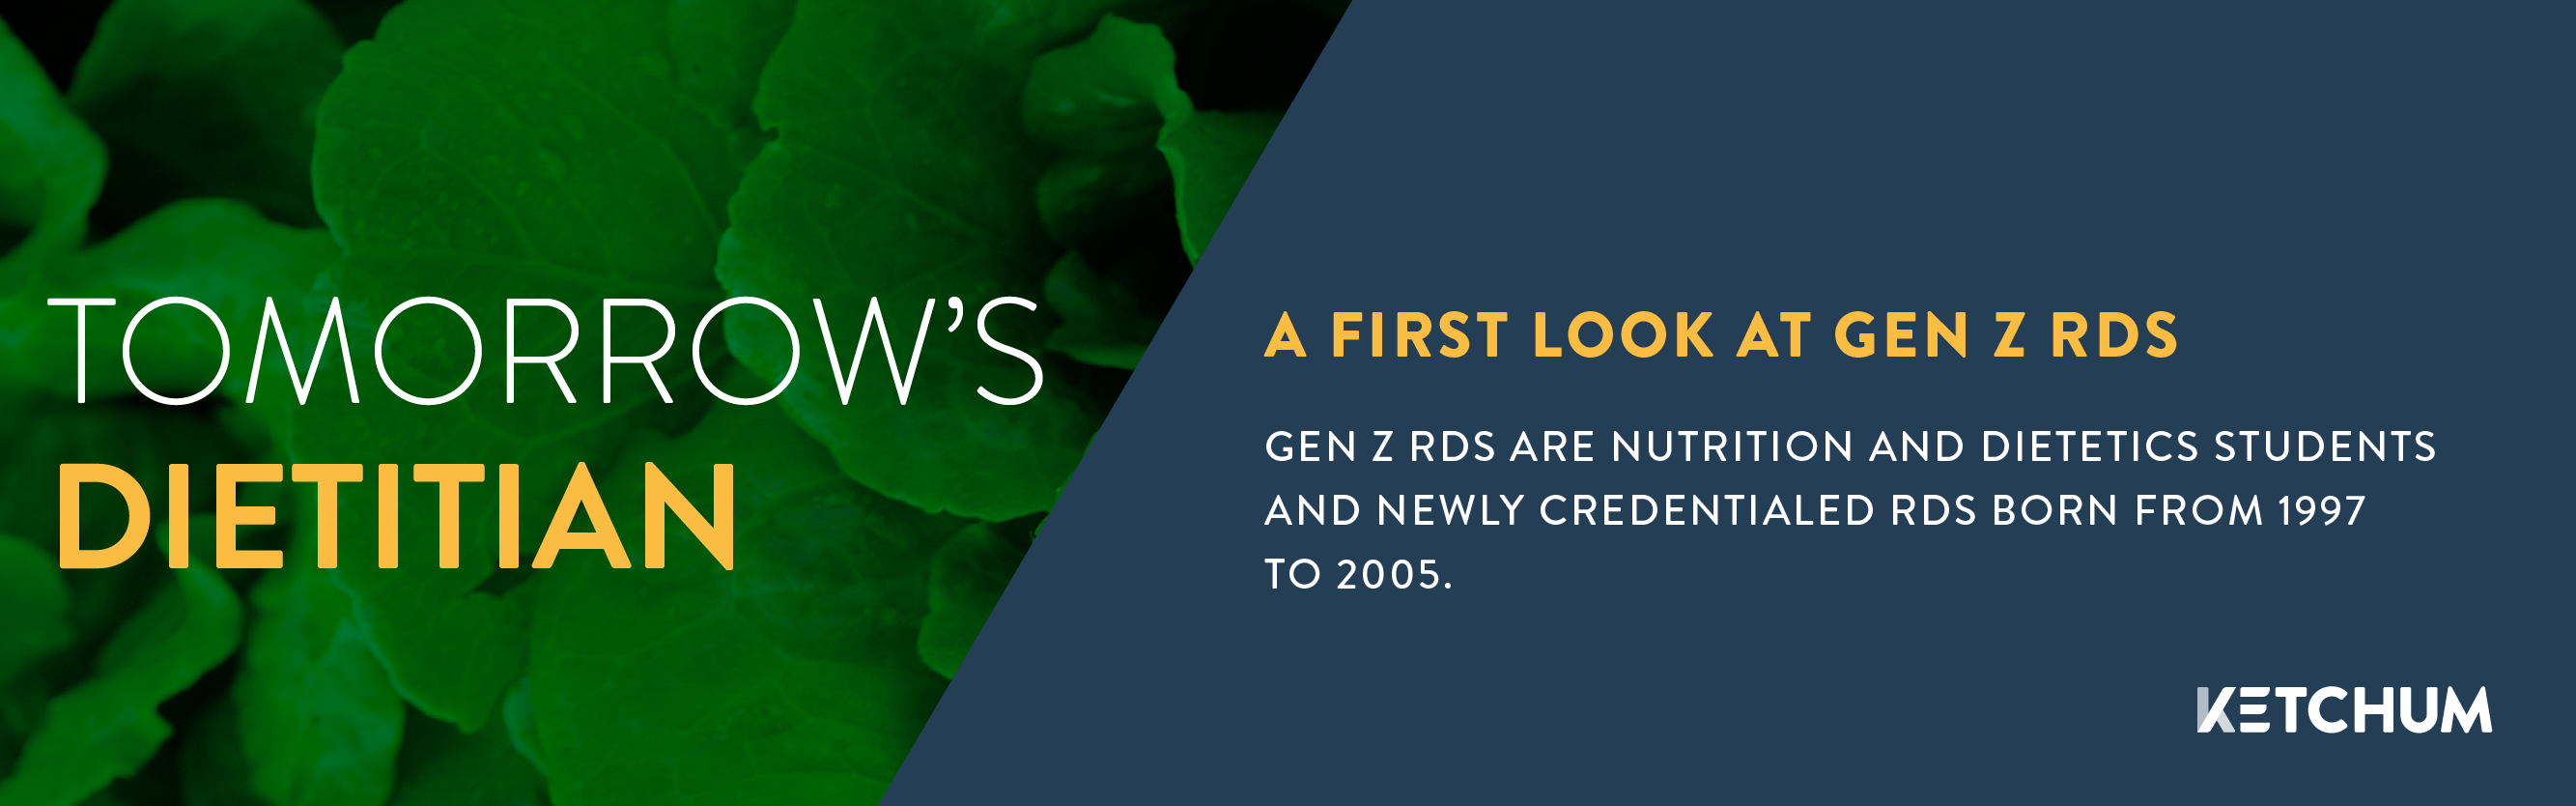 Tomorrow's Dietitian: A First Look at Gen Z RDs